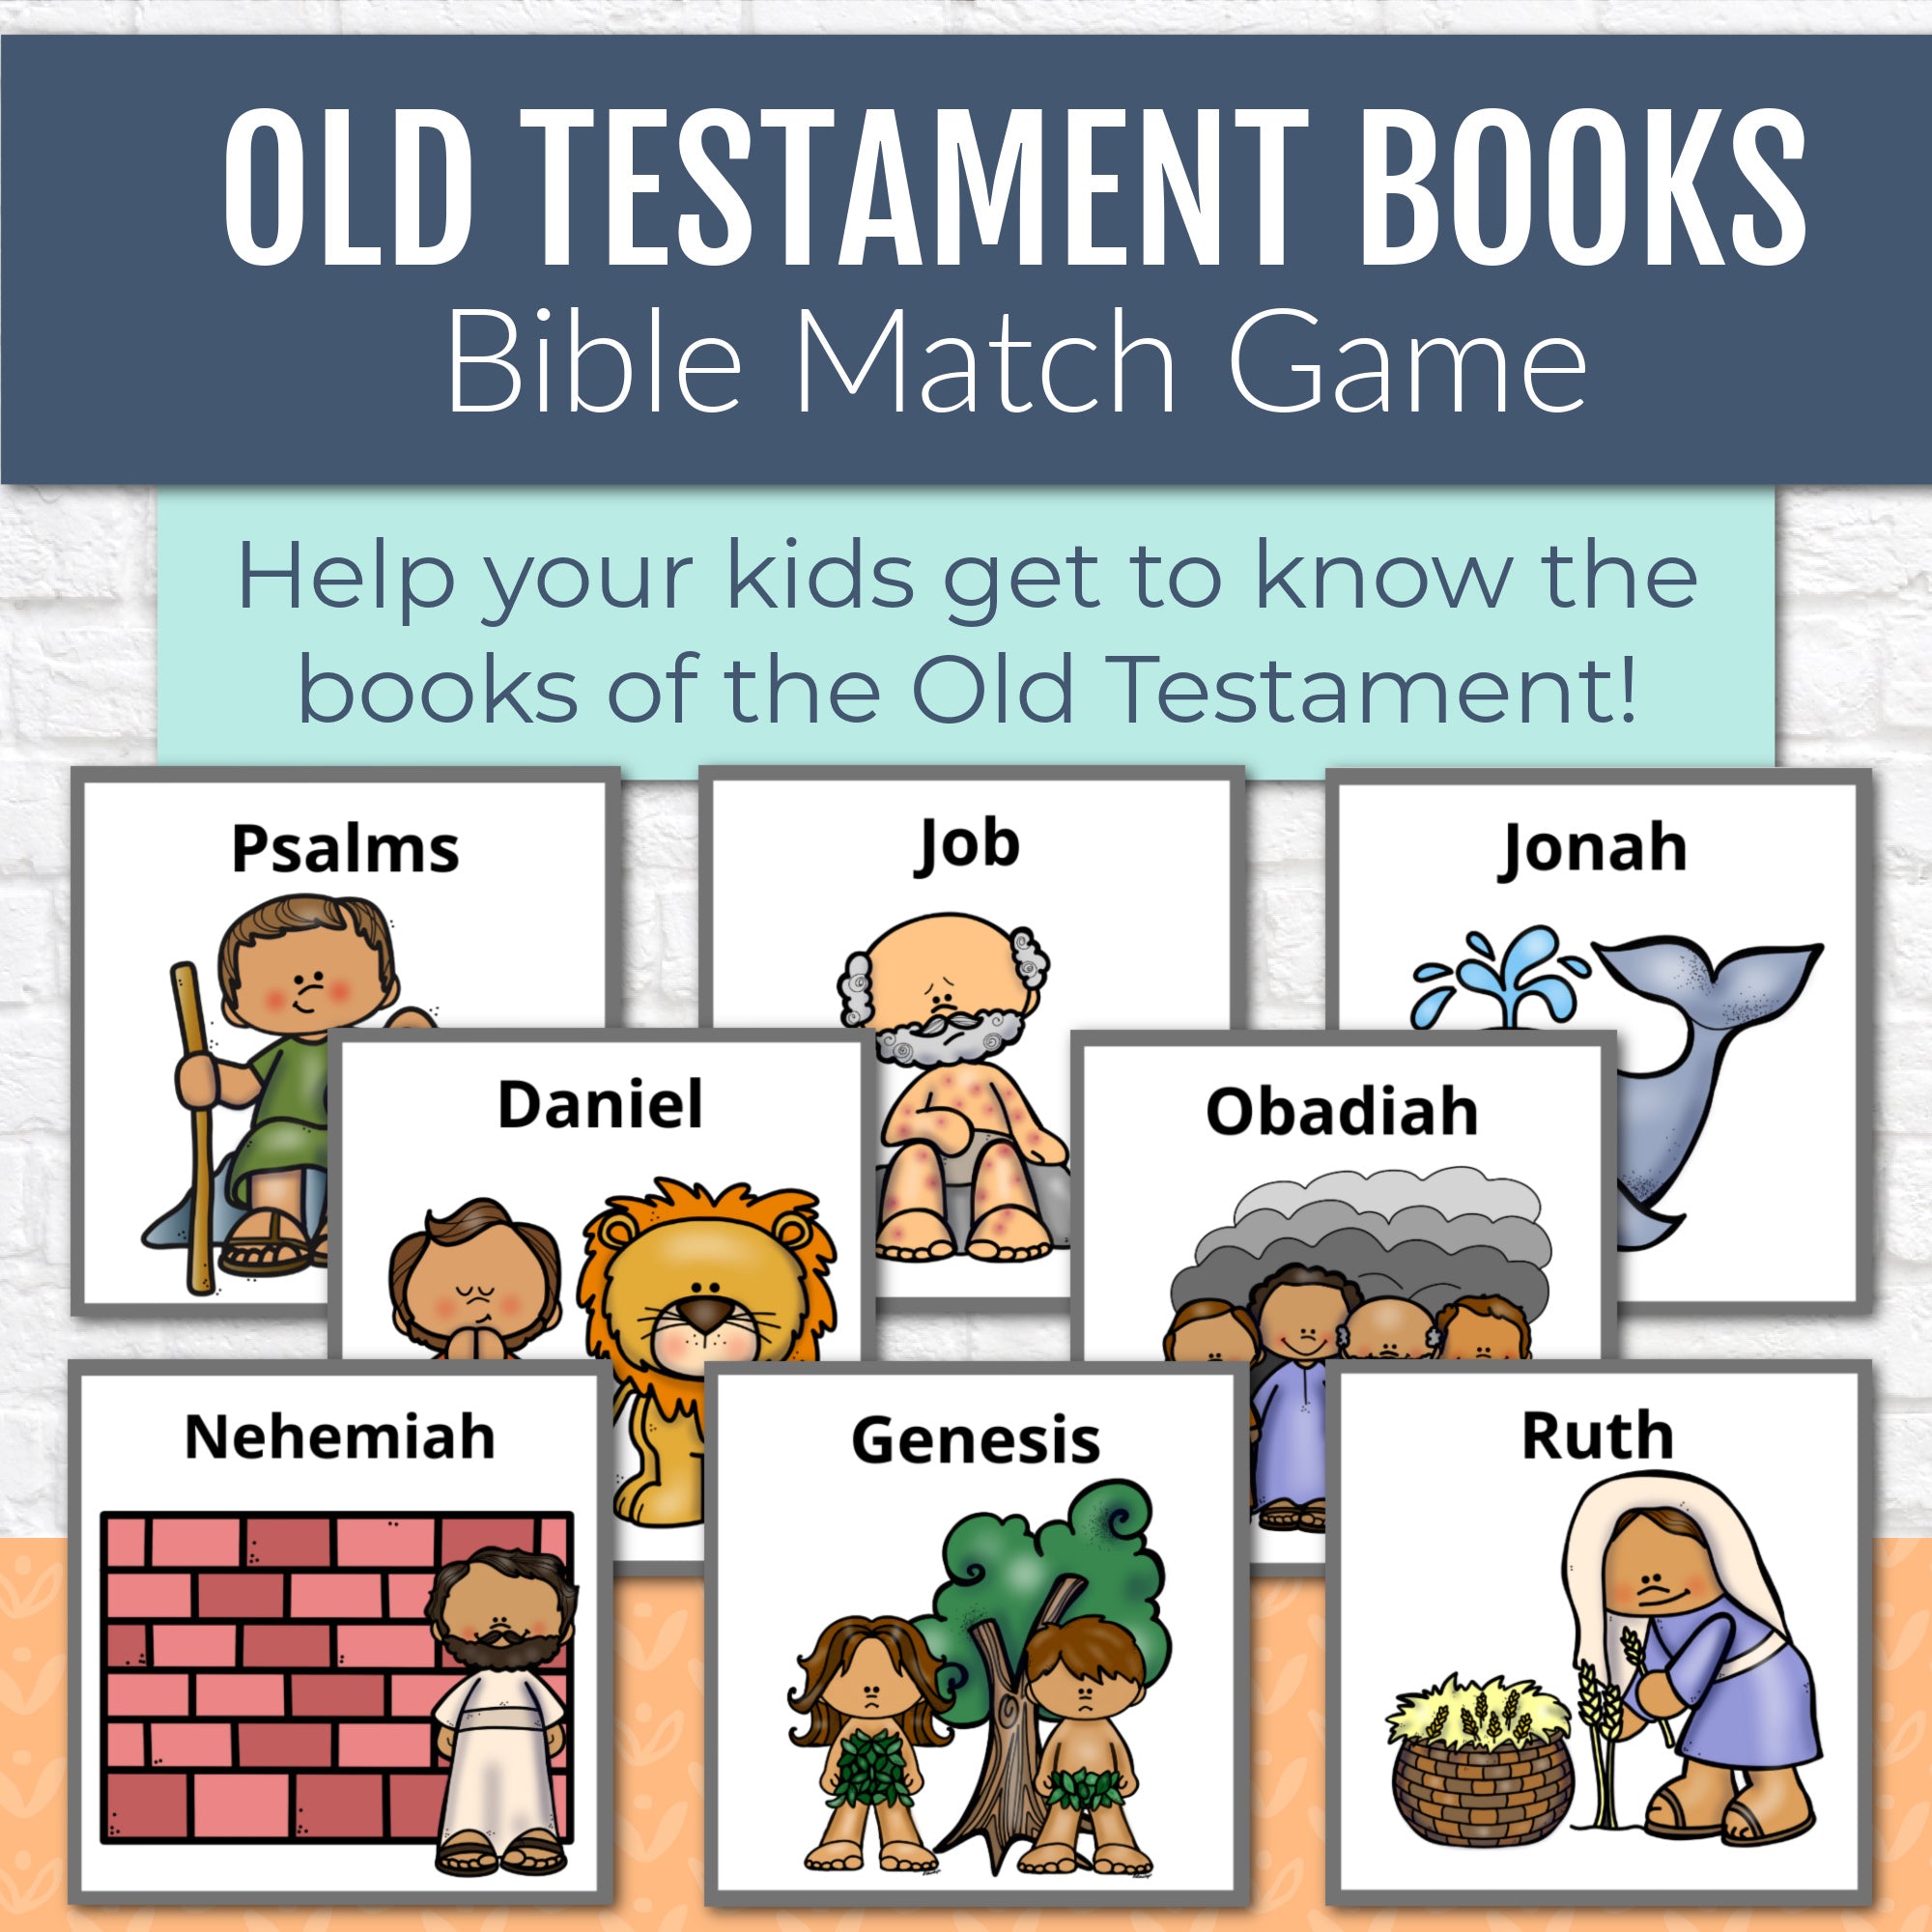 Bible Match Game for Old Testament Books, Bible Games for Youth